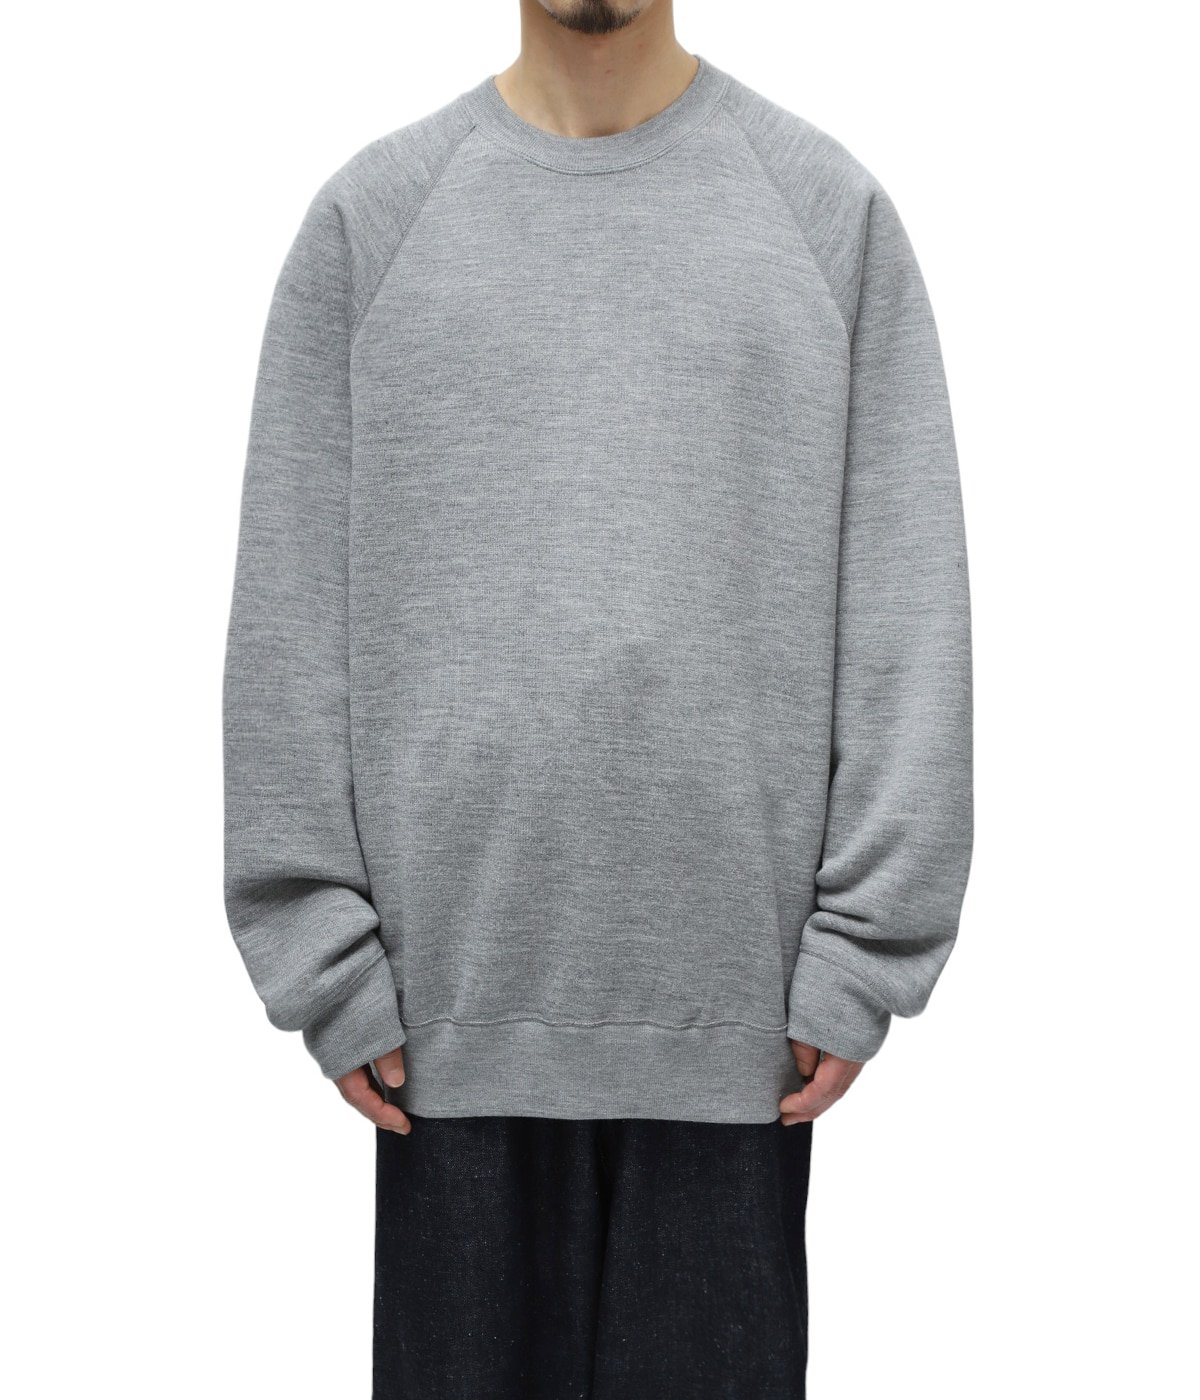 Bulky Wool Terry Crew Neck Sweat | Graphpaper(グラフペーパー 